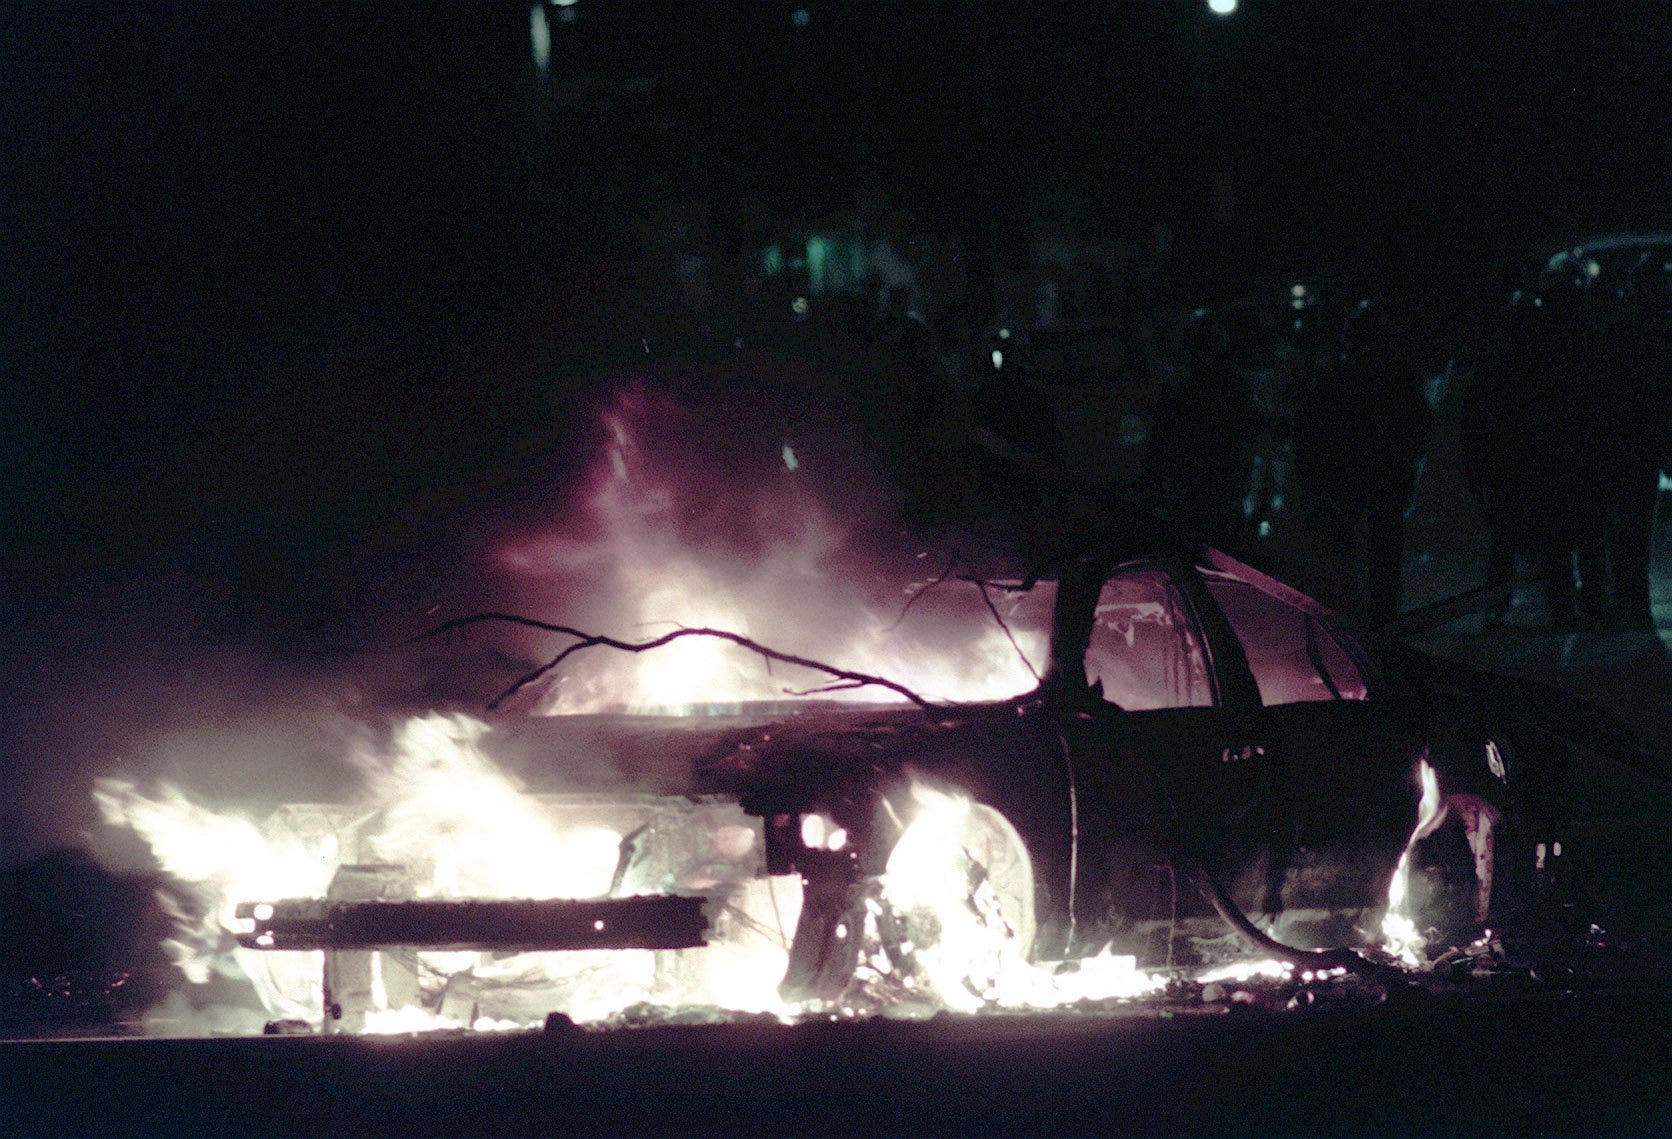 A police car burns on Bogue street in East Lansing during a riot in 1999.